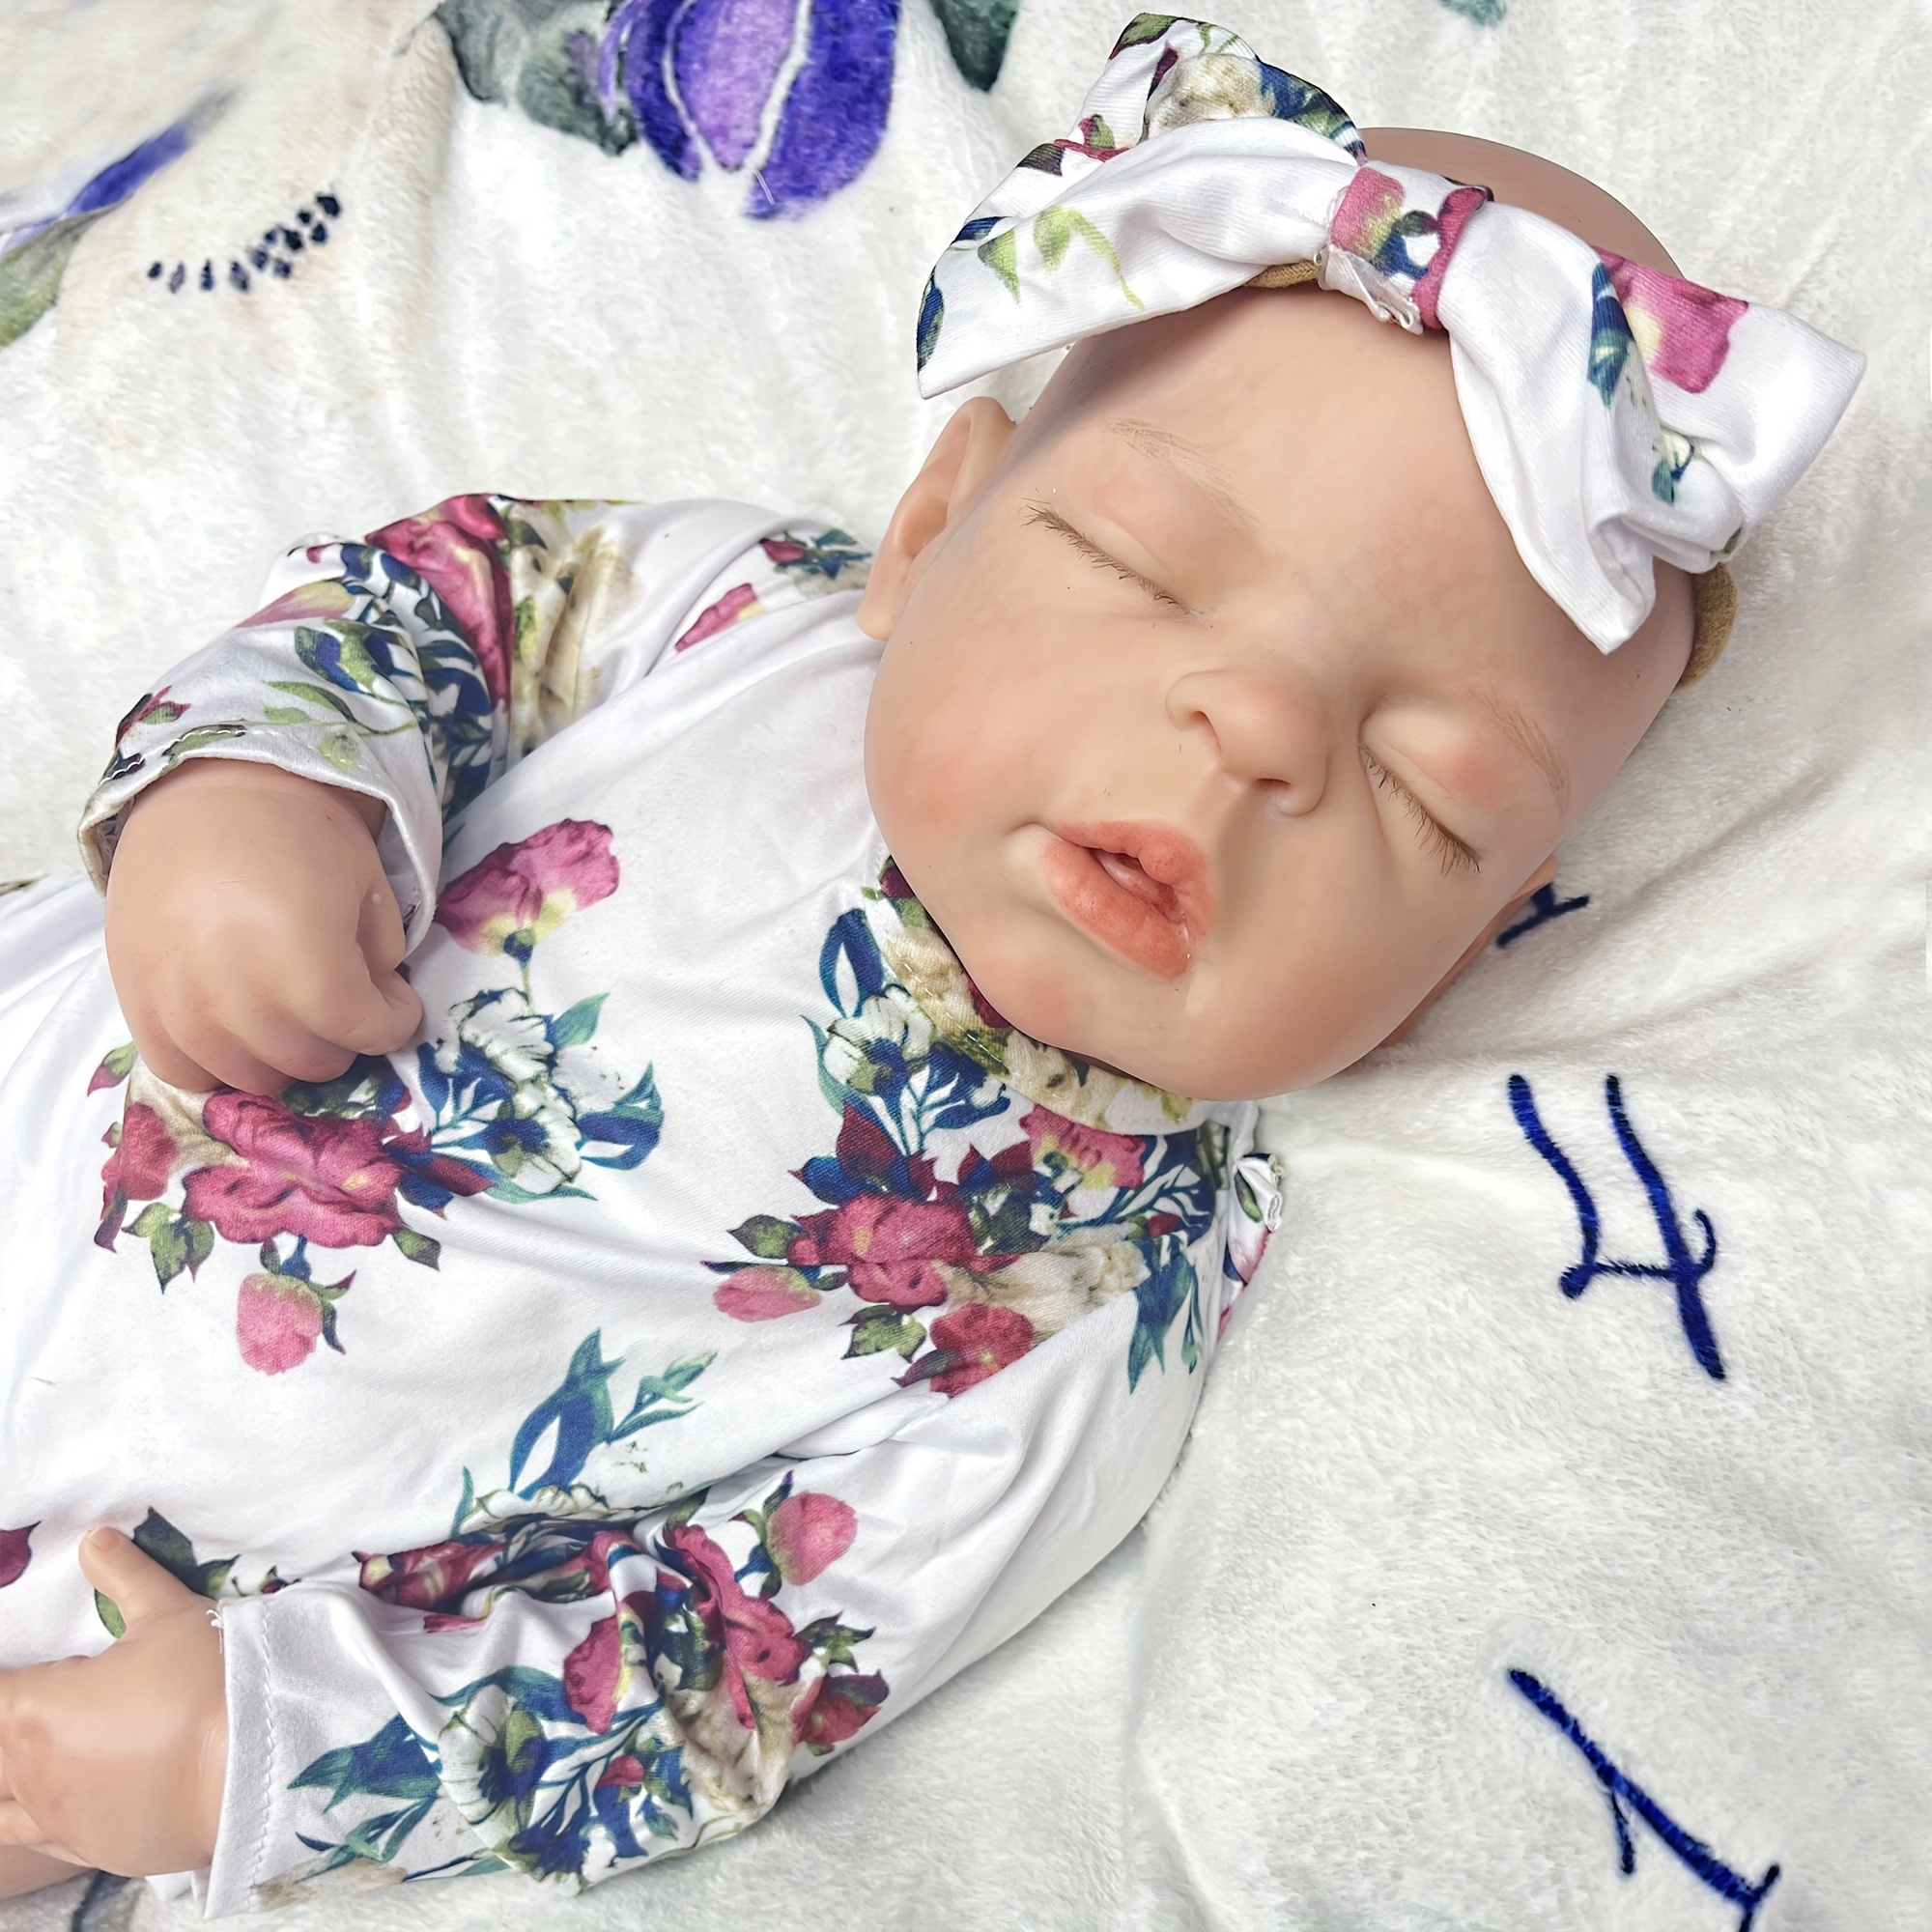 22 Inch/55cm All Silicone Big Sleeping Girl Reborn Doll - A Lifelike Full  Body Soft Solid Silicone Newborn Baby Doll Perfect for Collection Gift Hallo